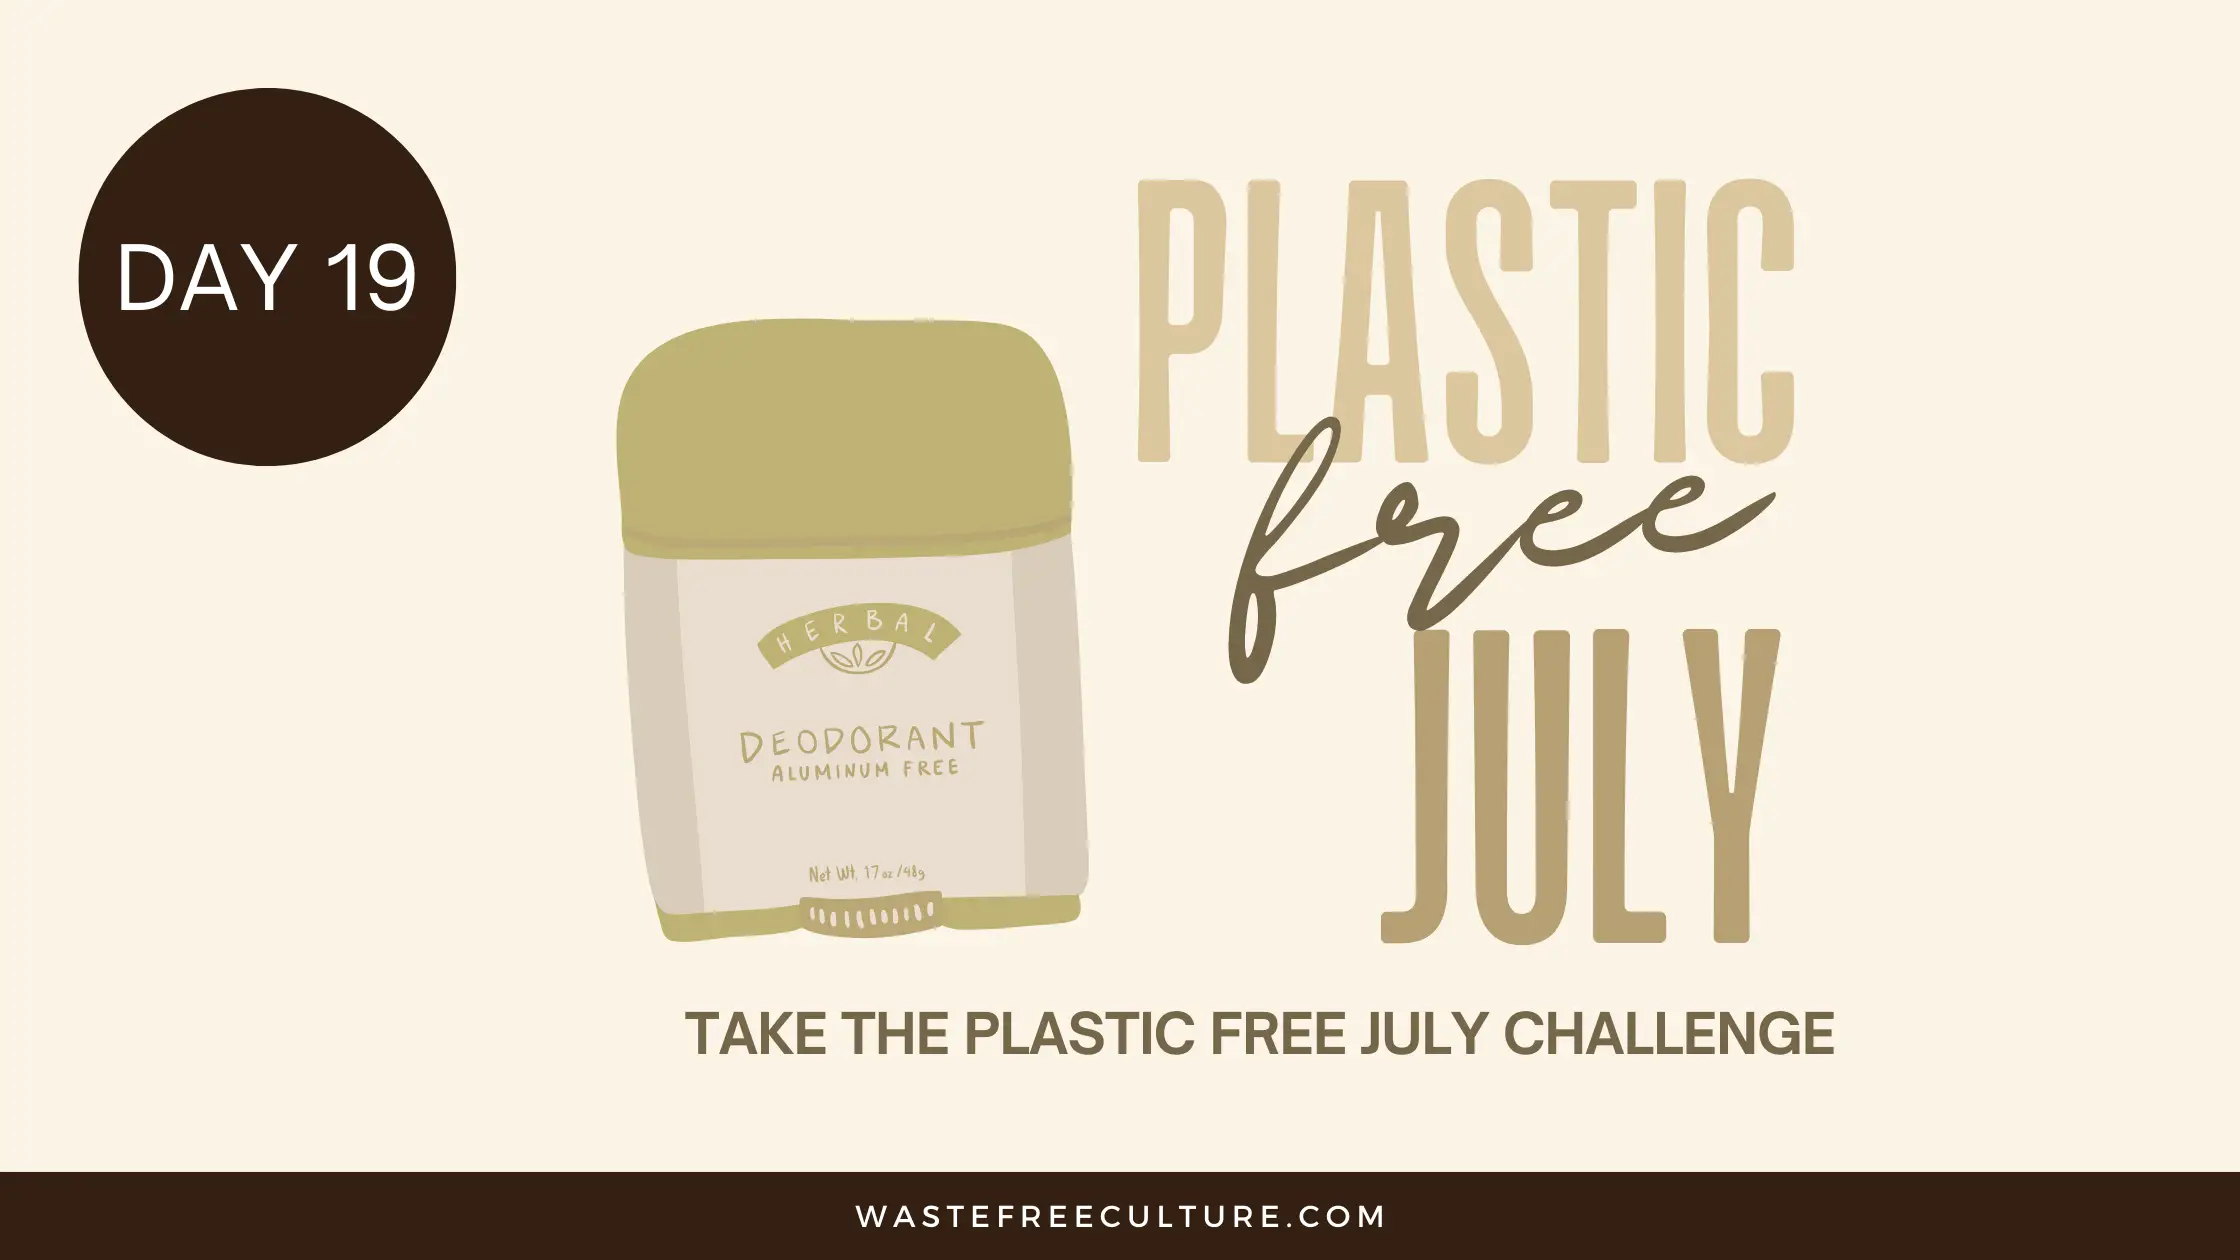 Day 19 of the Plastic Free July Challenge